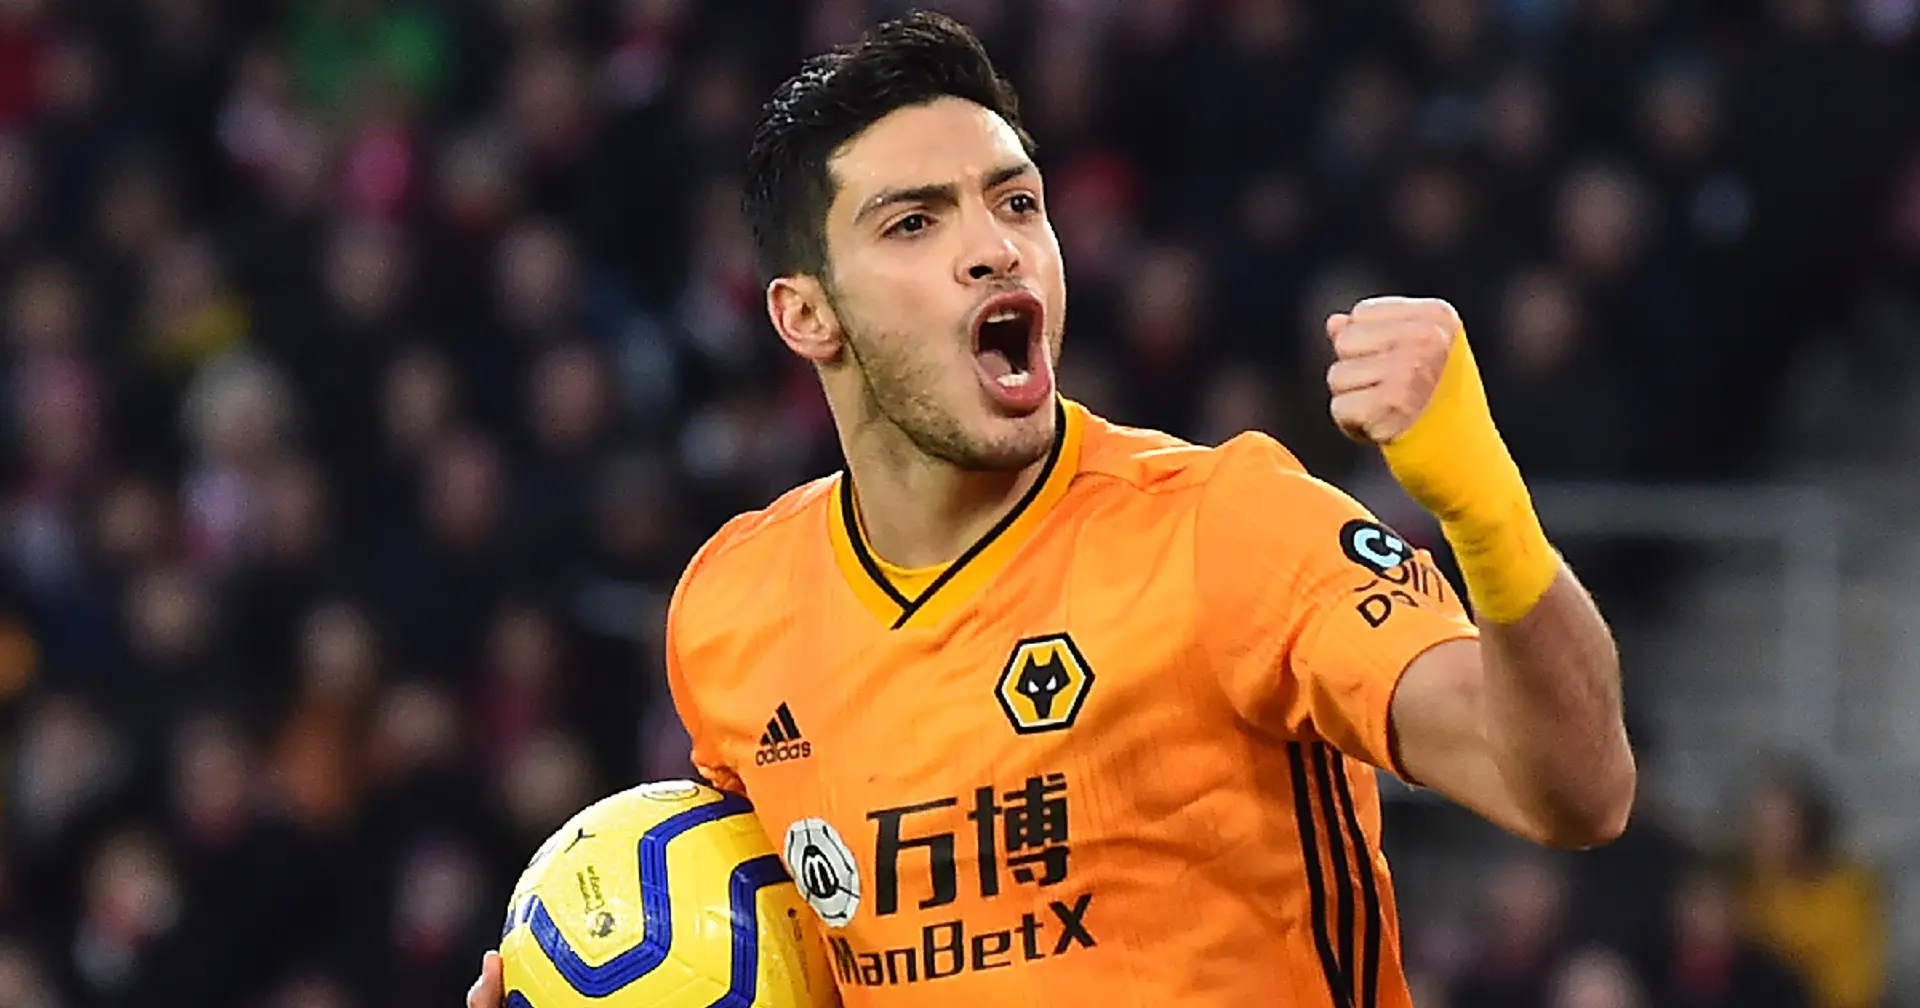 'I am open to whatever comes': Raul Jimenez speaks about his future amidst Man United links